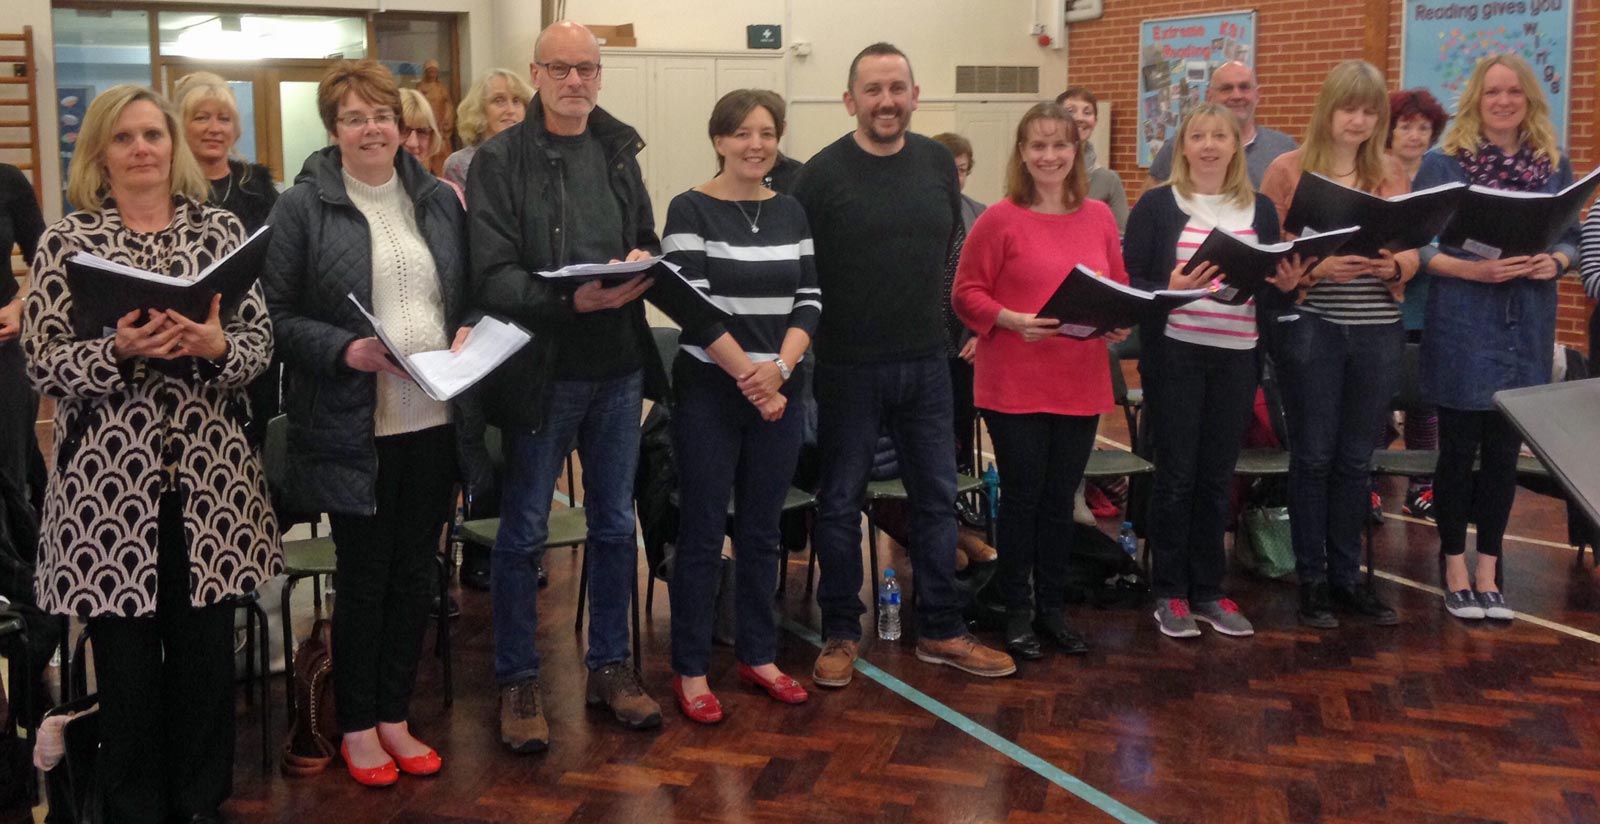 All Together Now Community Choir rehearsing ‘One Day Like This’ by Elbow with Kathryn Scott (Blue &white jumper) from the Almsford Community Fun Day team